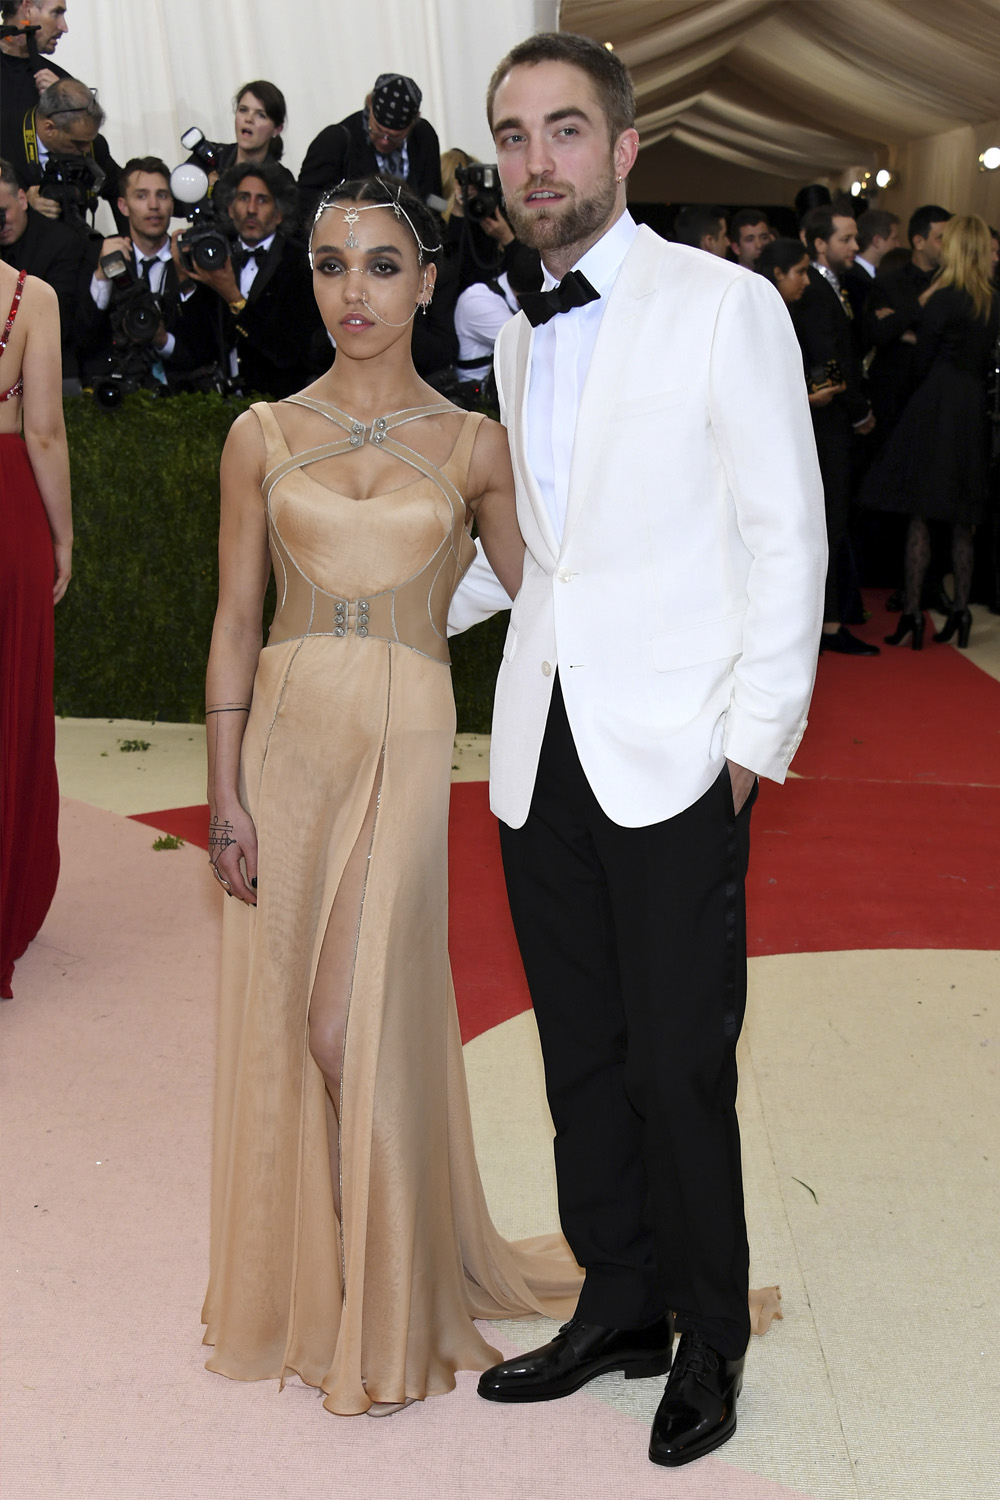 FKA twigs in Atelier Versace and Robert Pattinson in Dior Homme